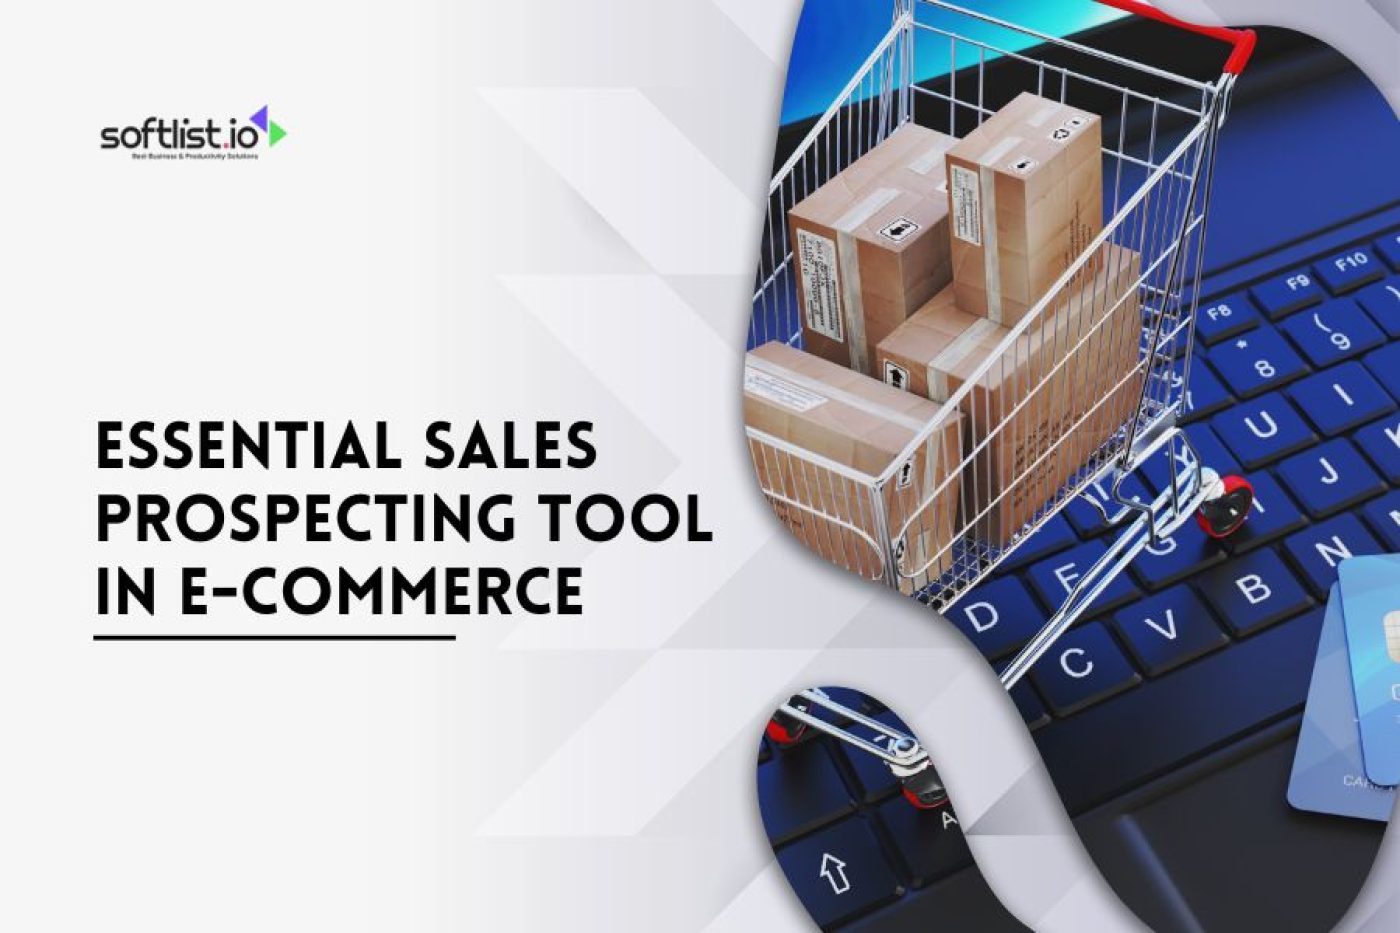 Essential Sales Prospecting Tool in E-commerce